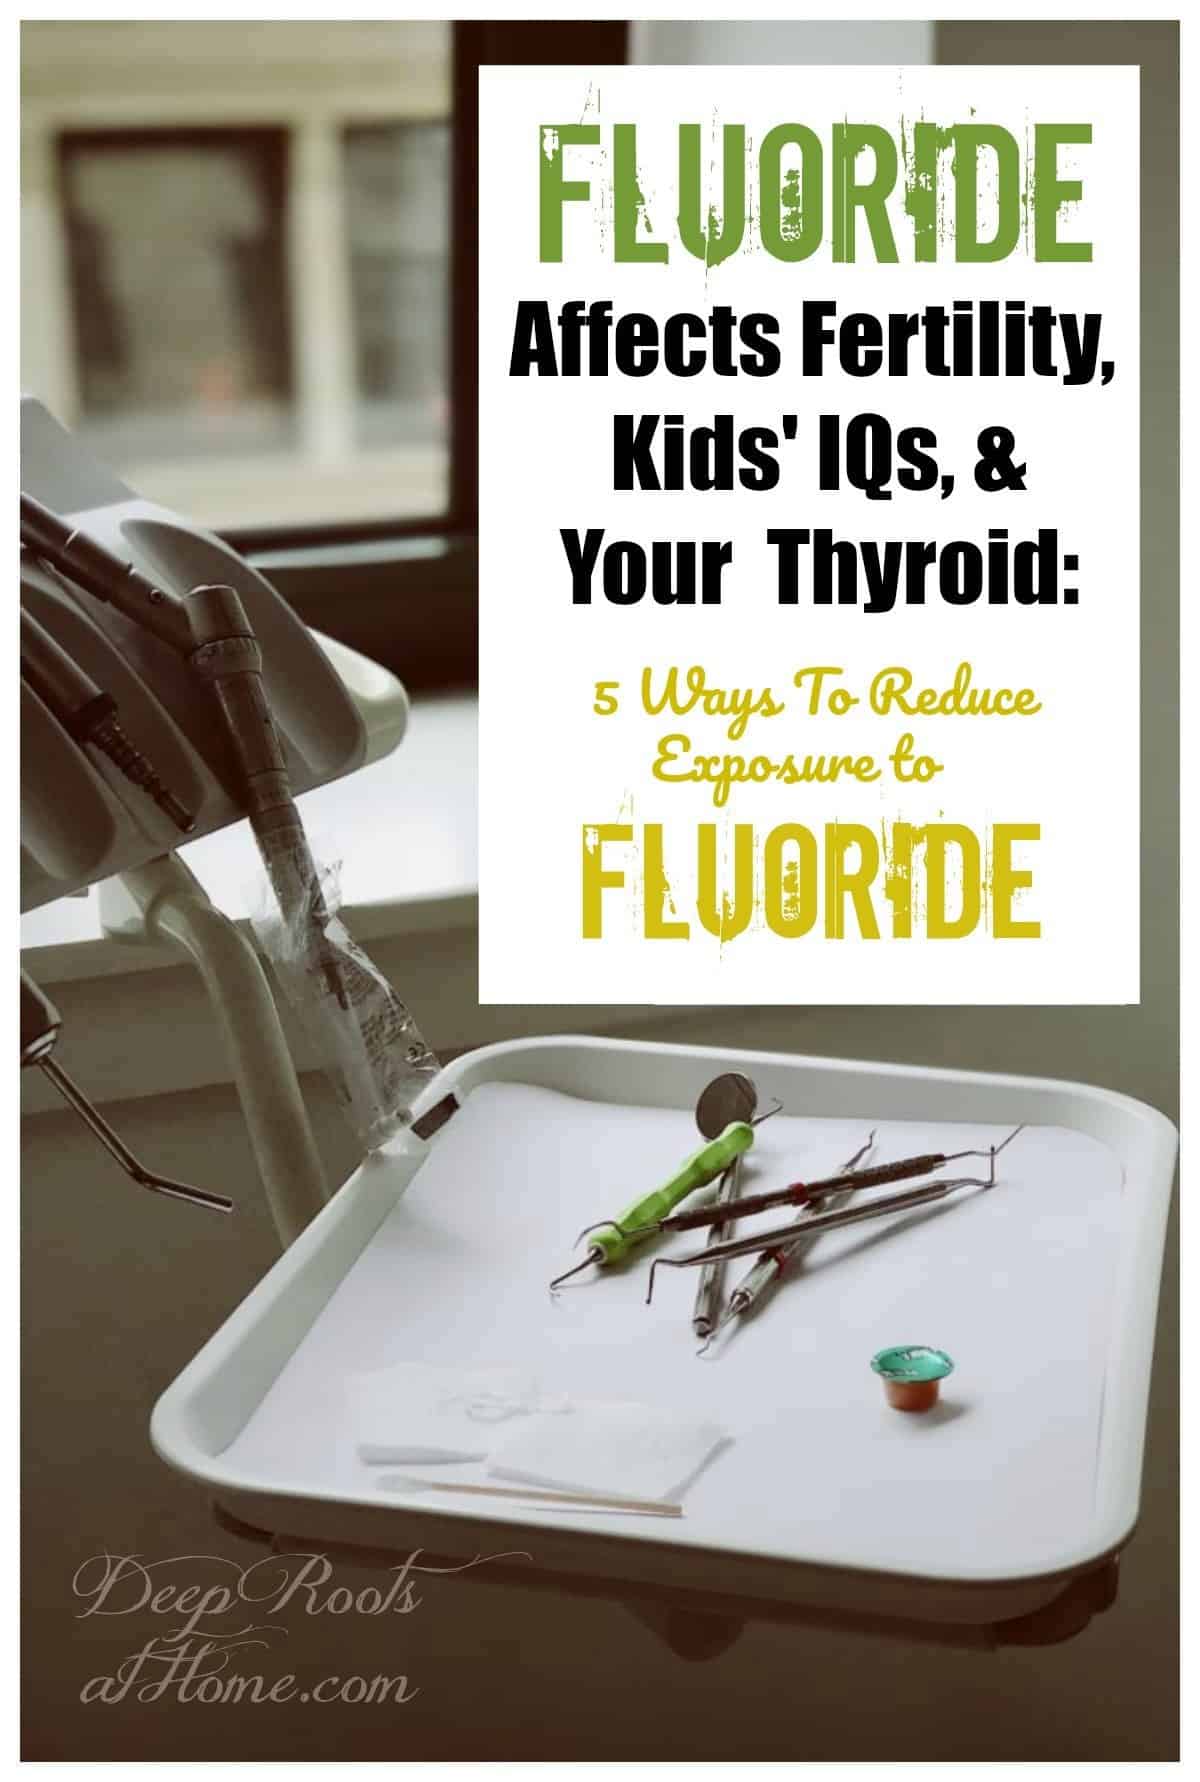 Sodium Fluoride Affects Our Fertility, Kid's IQs, and Your Thyroid. A tray of dental tools in a dentist's office.